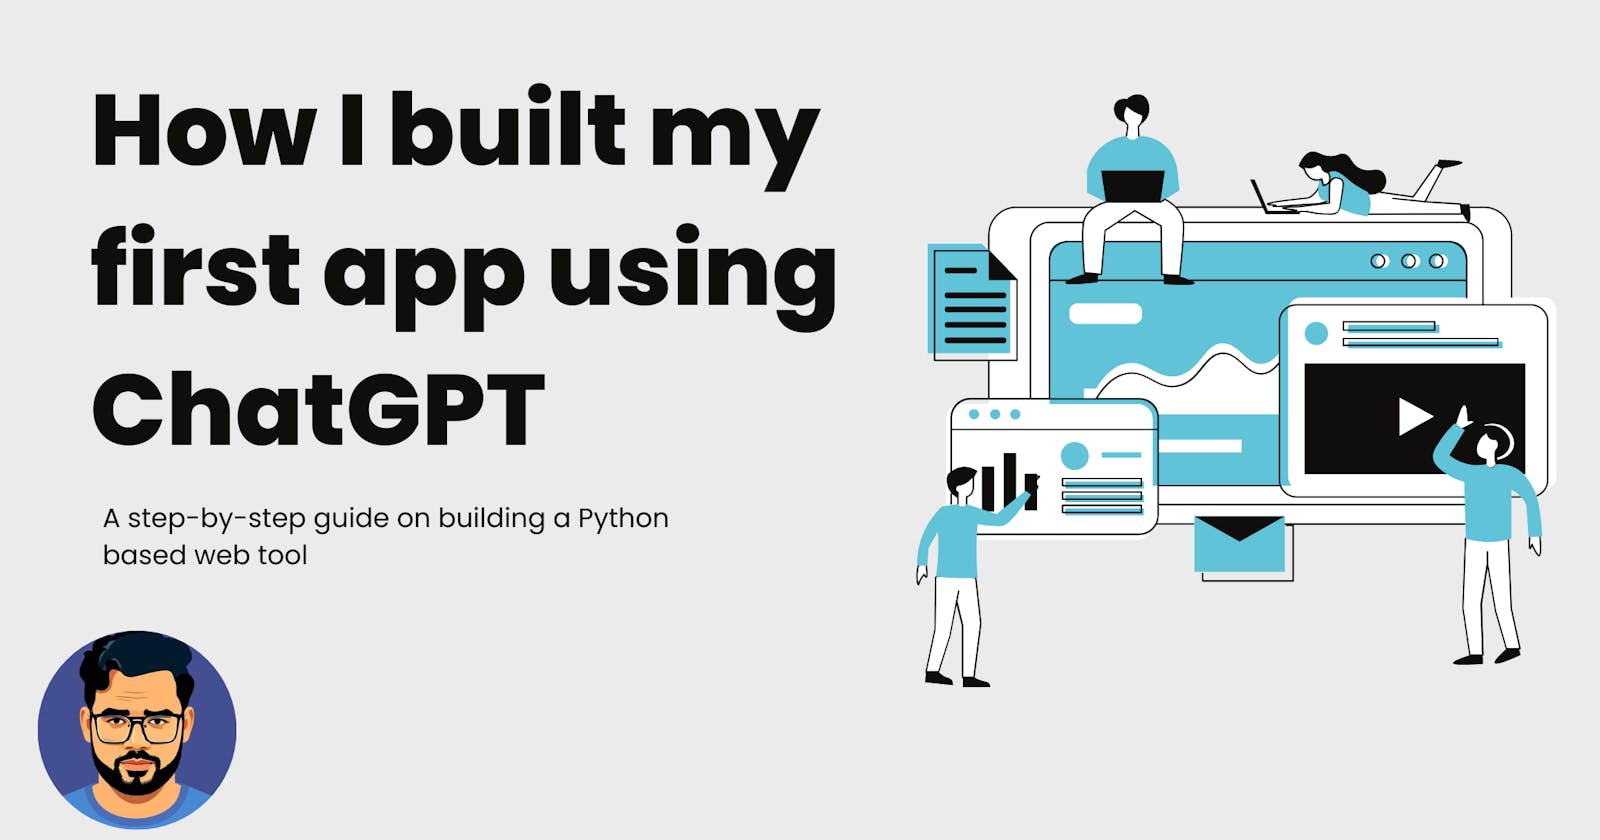 How I built my first app using ChatGPT